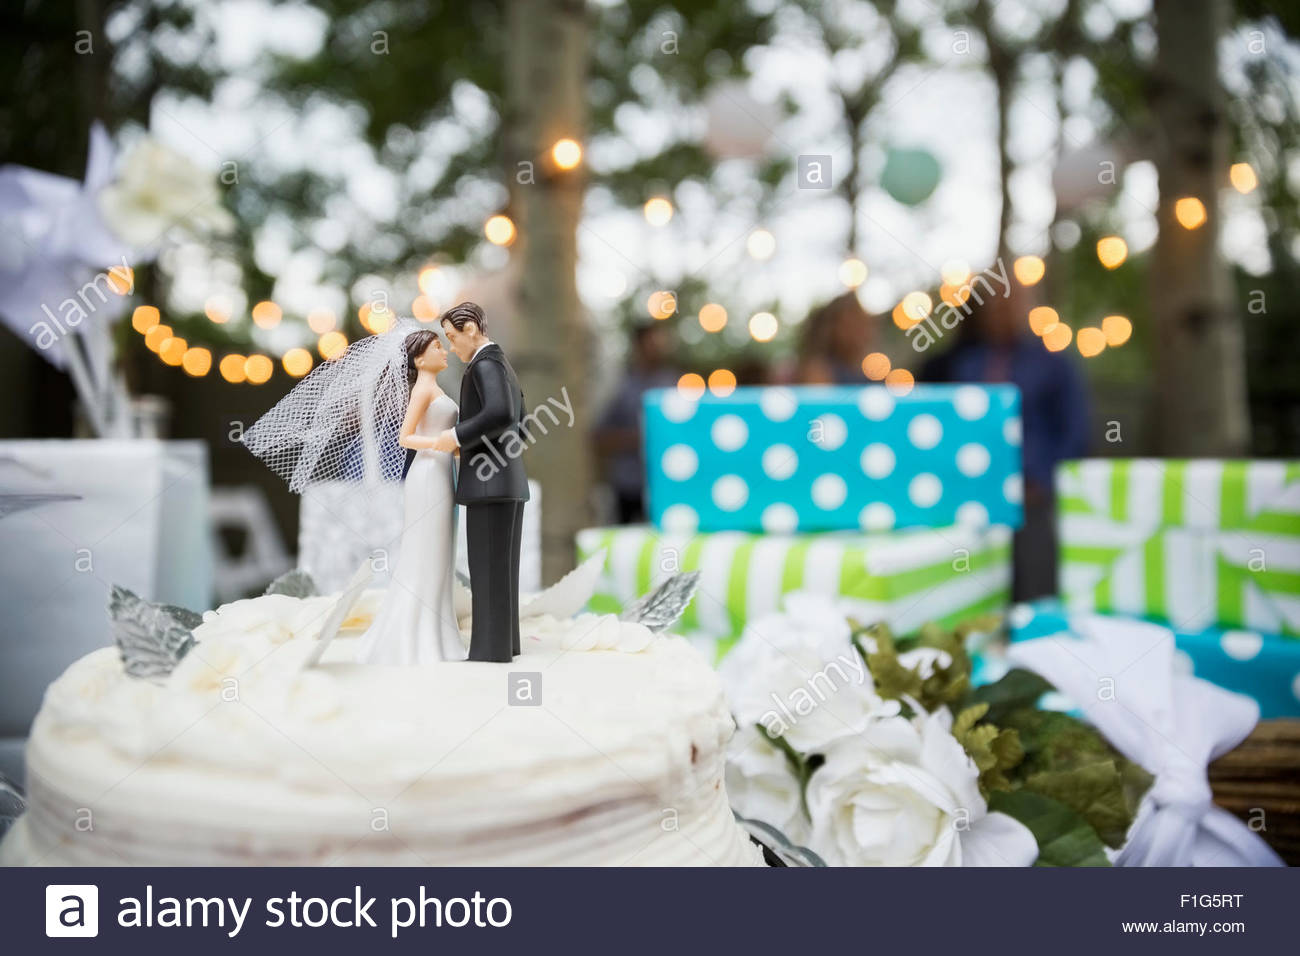 Bride and groom cake topper on cake Stock Photo